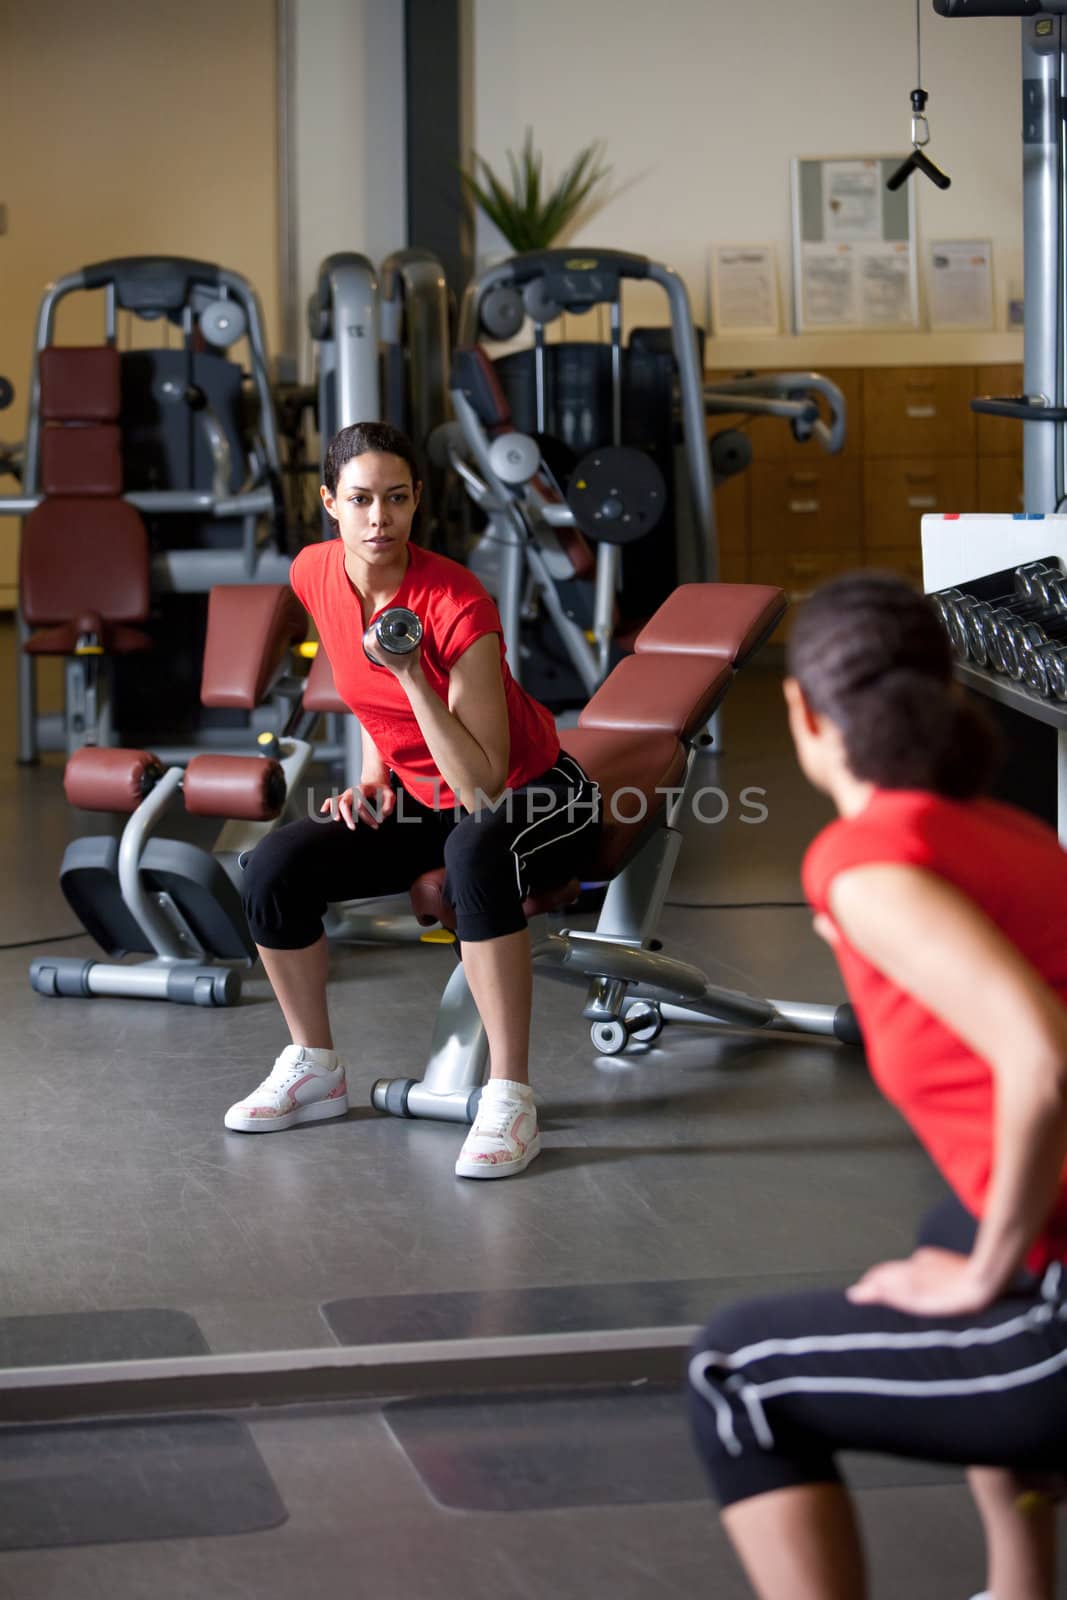 Attractive woman working out with weights in the gym